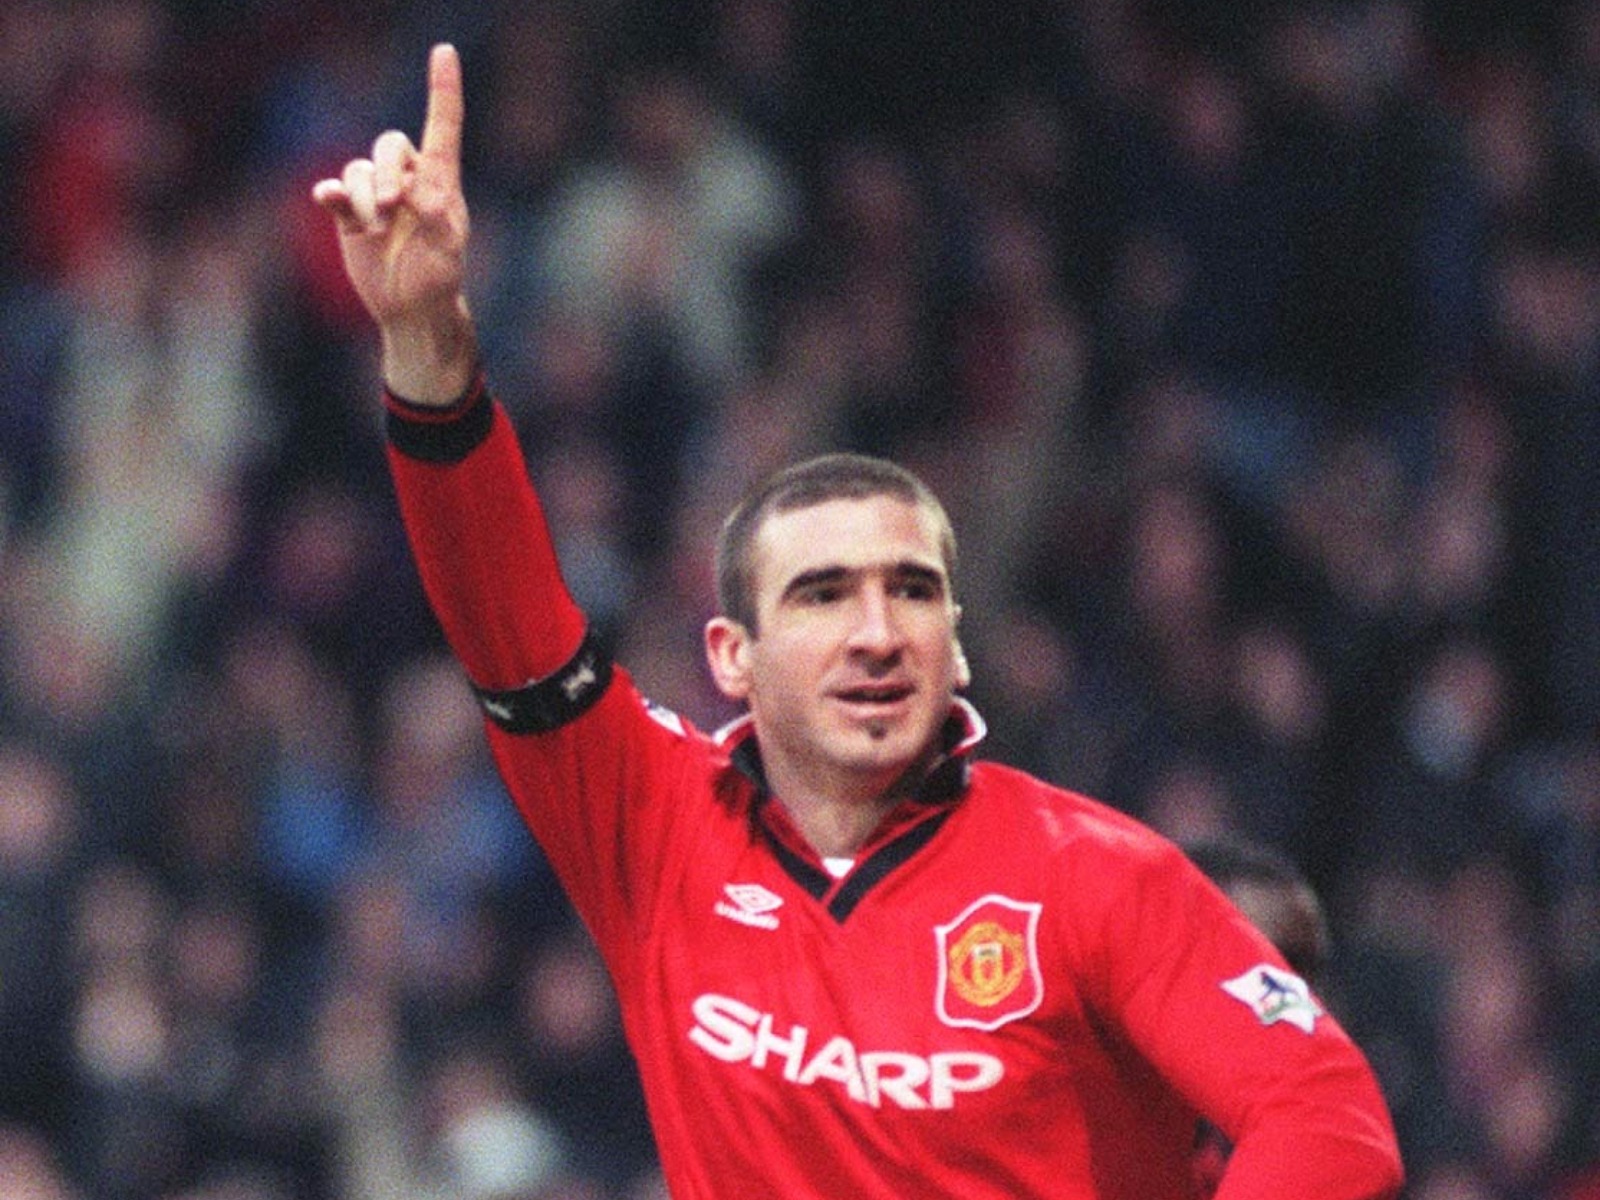 Manchester United Eric Cantona Wallpaper On Jakpost Travel